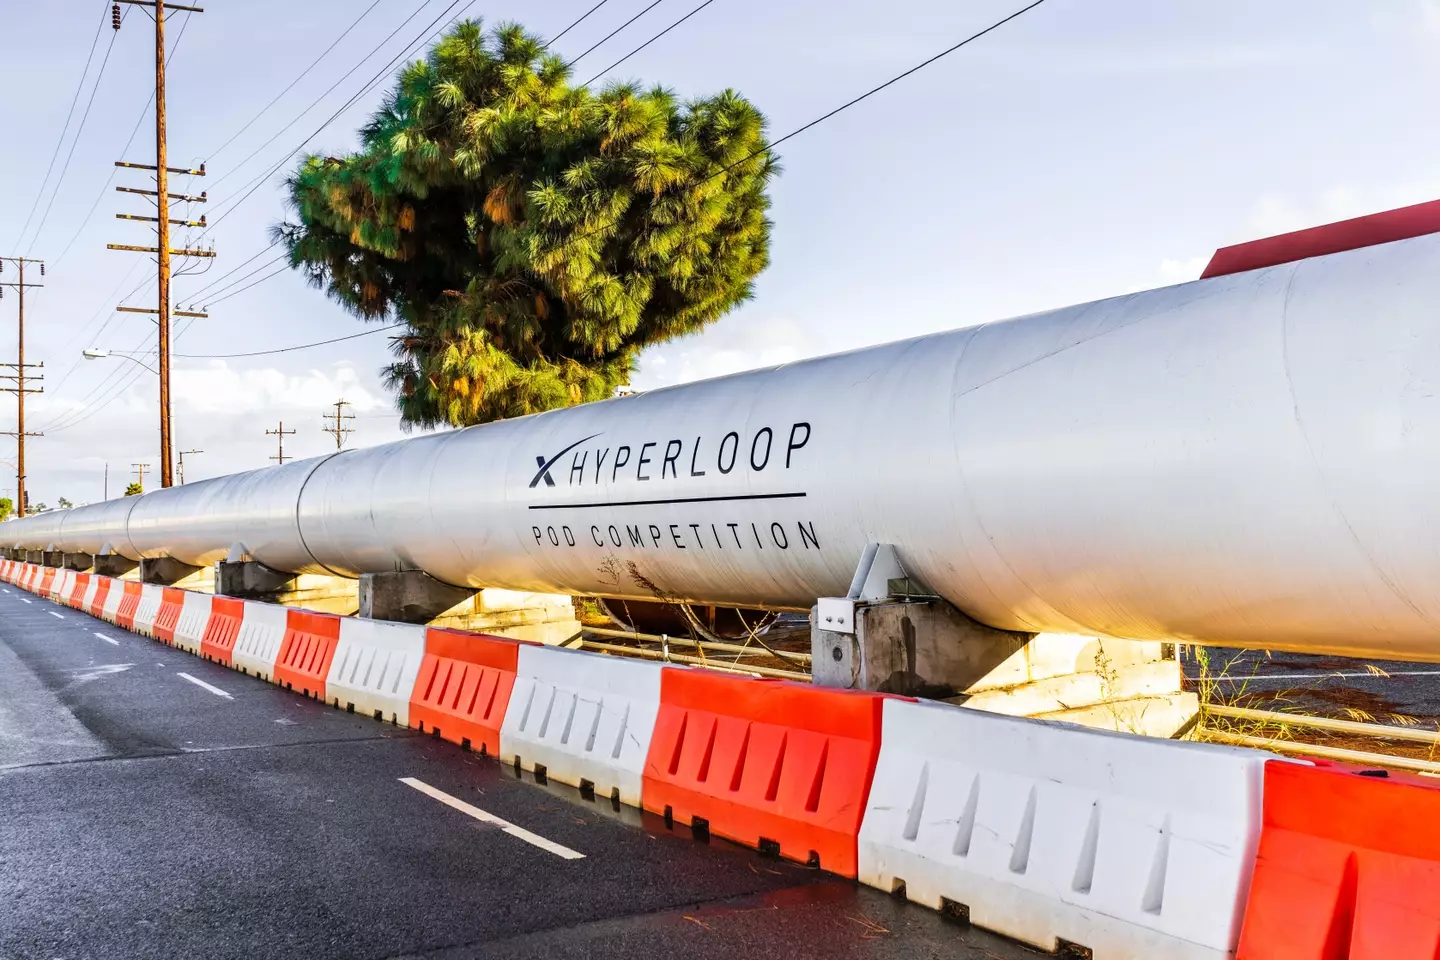 The hyperloop could transport people at great speeds.